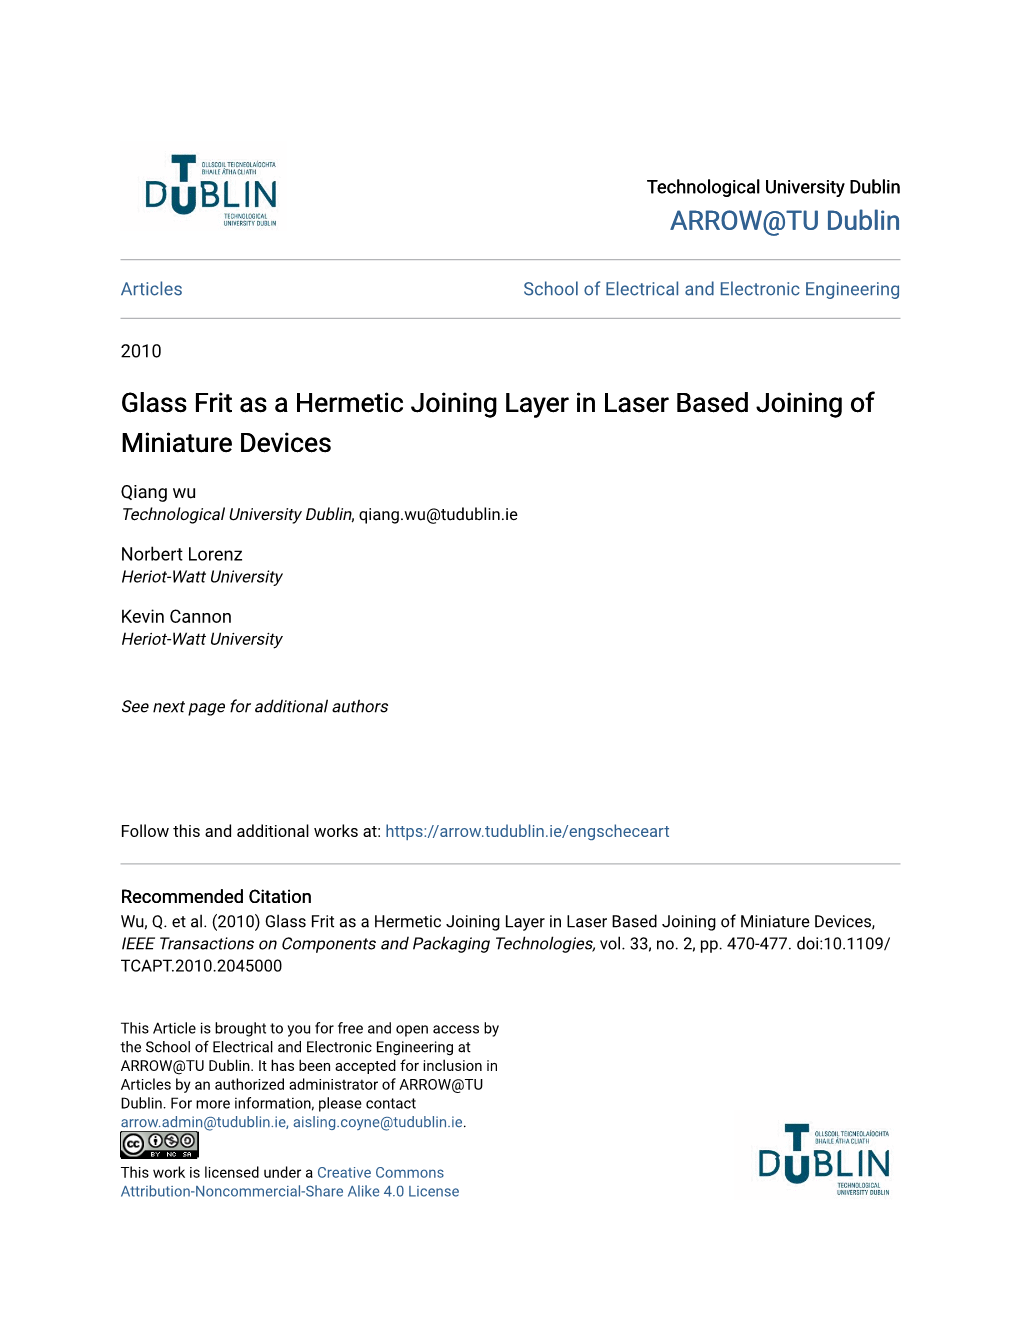 Glass Frit As a Hermetic Joining Layer in Laser Based Joining of Miniature Devices